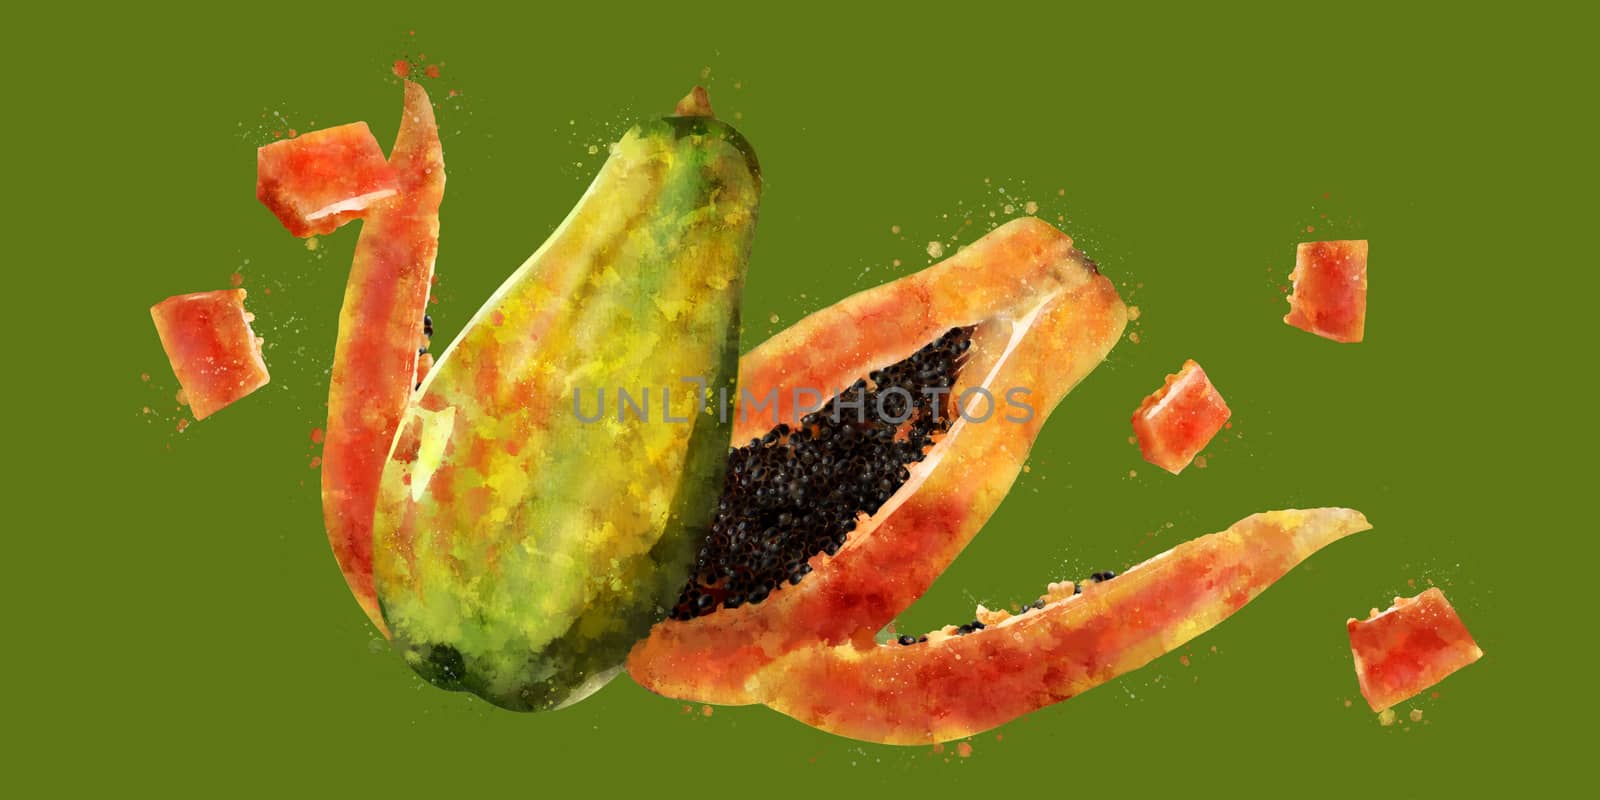 Papaya on green background. Watercolor illustration by ConceptCafe